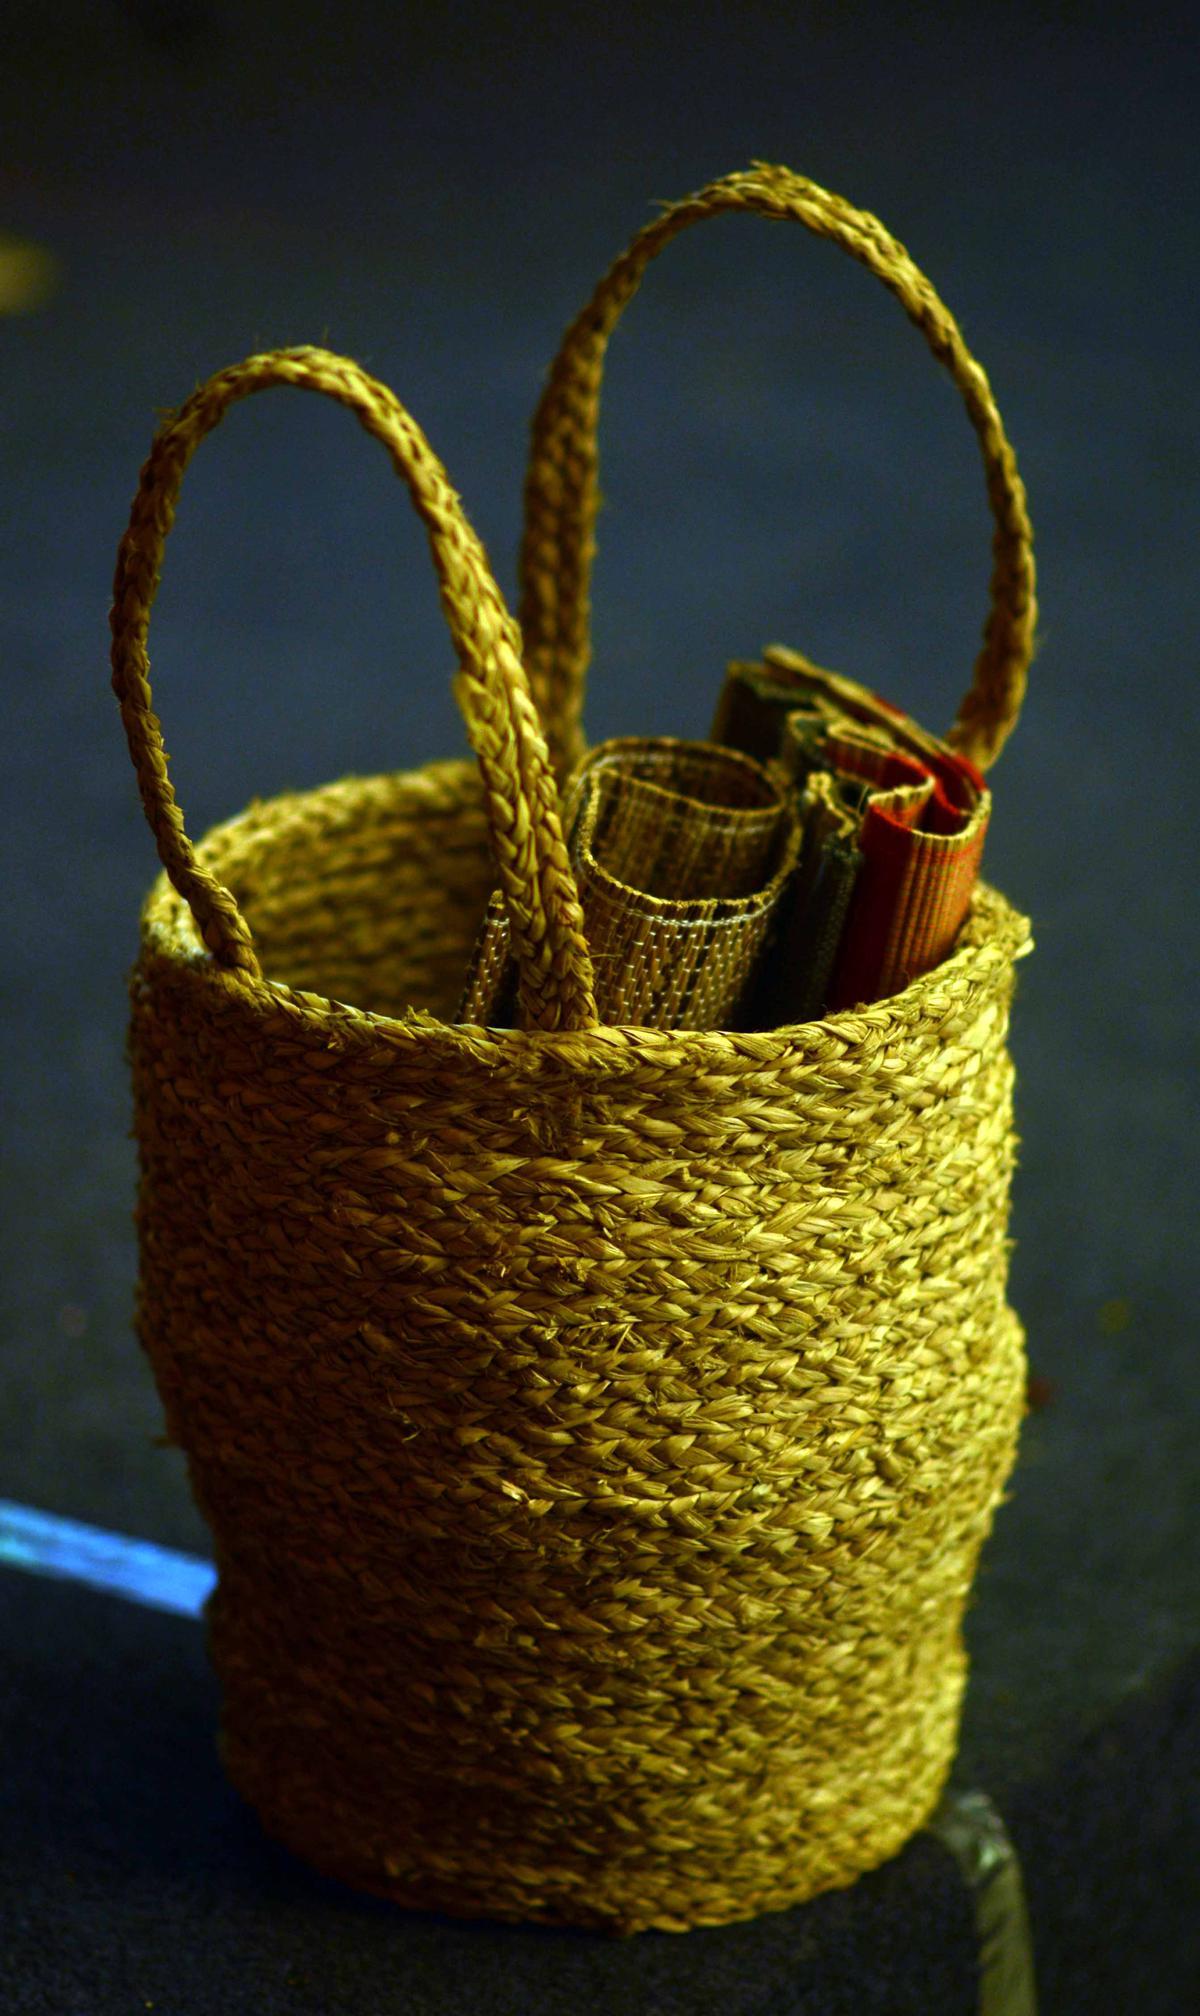 Baskets and other items made of natural fibres.